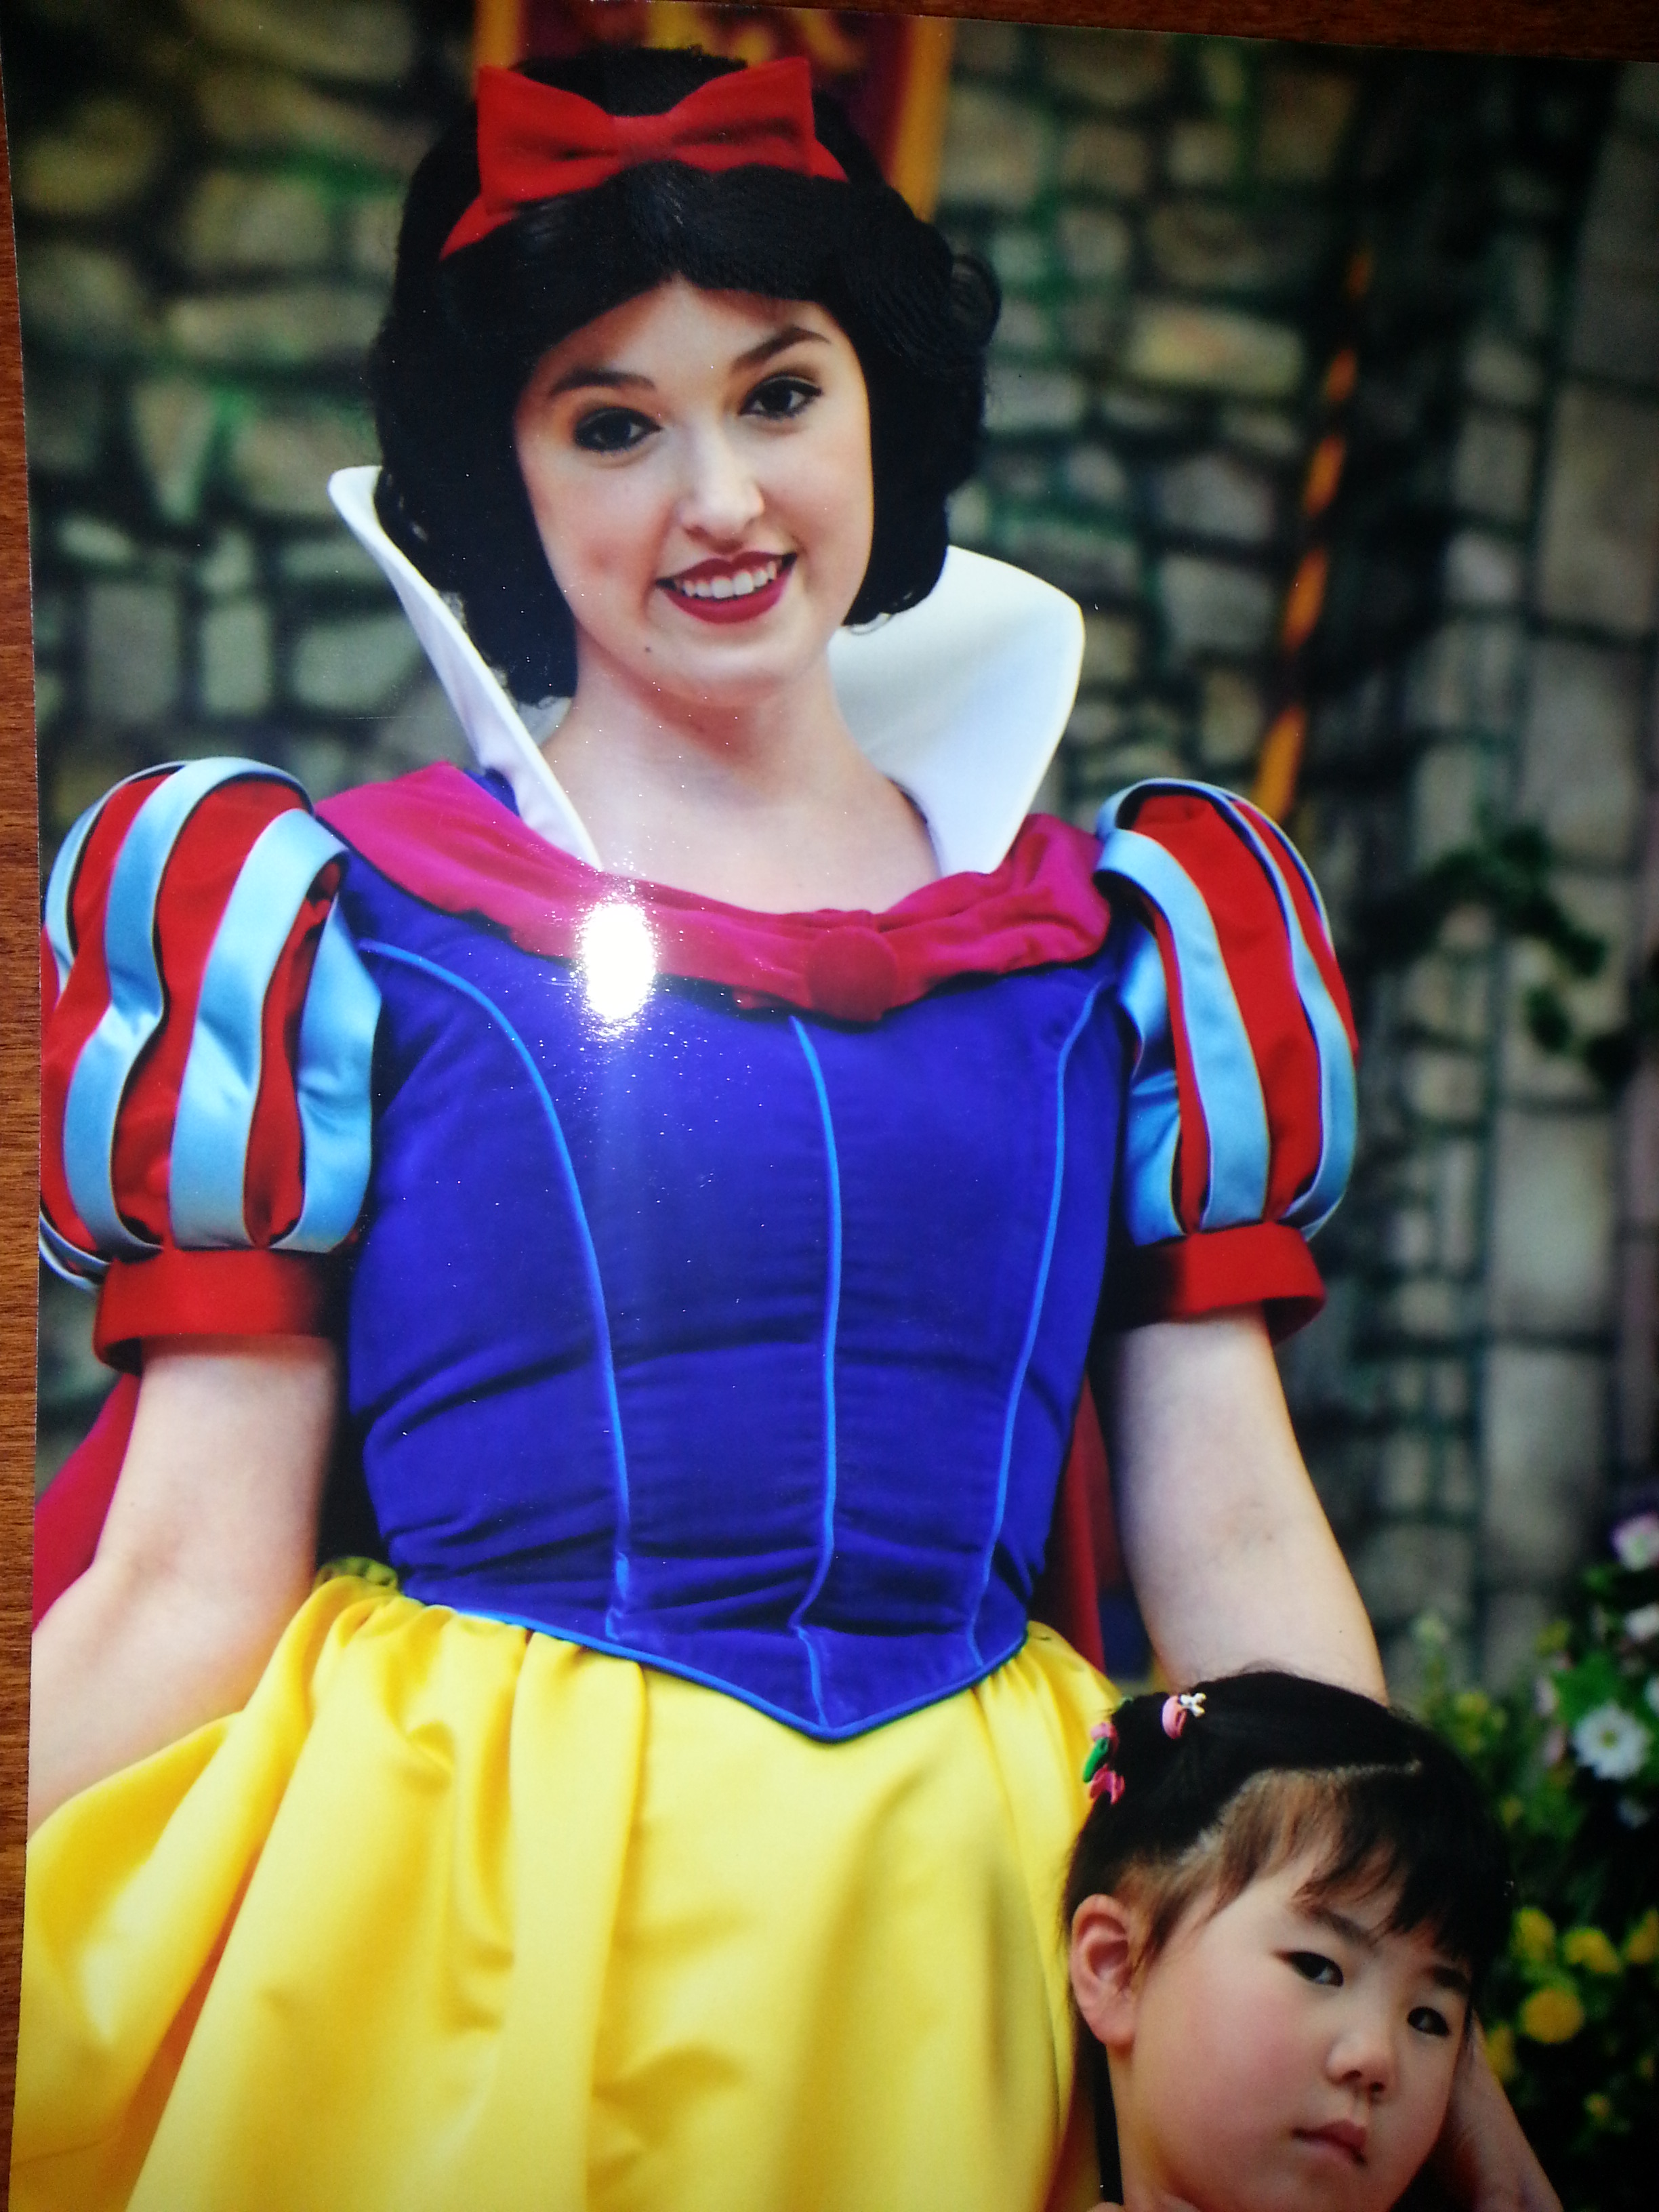 15 Positive Personality Traits of Princess Snow White Worth Developing